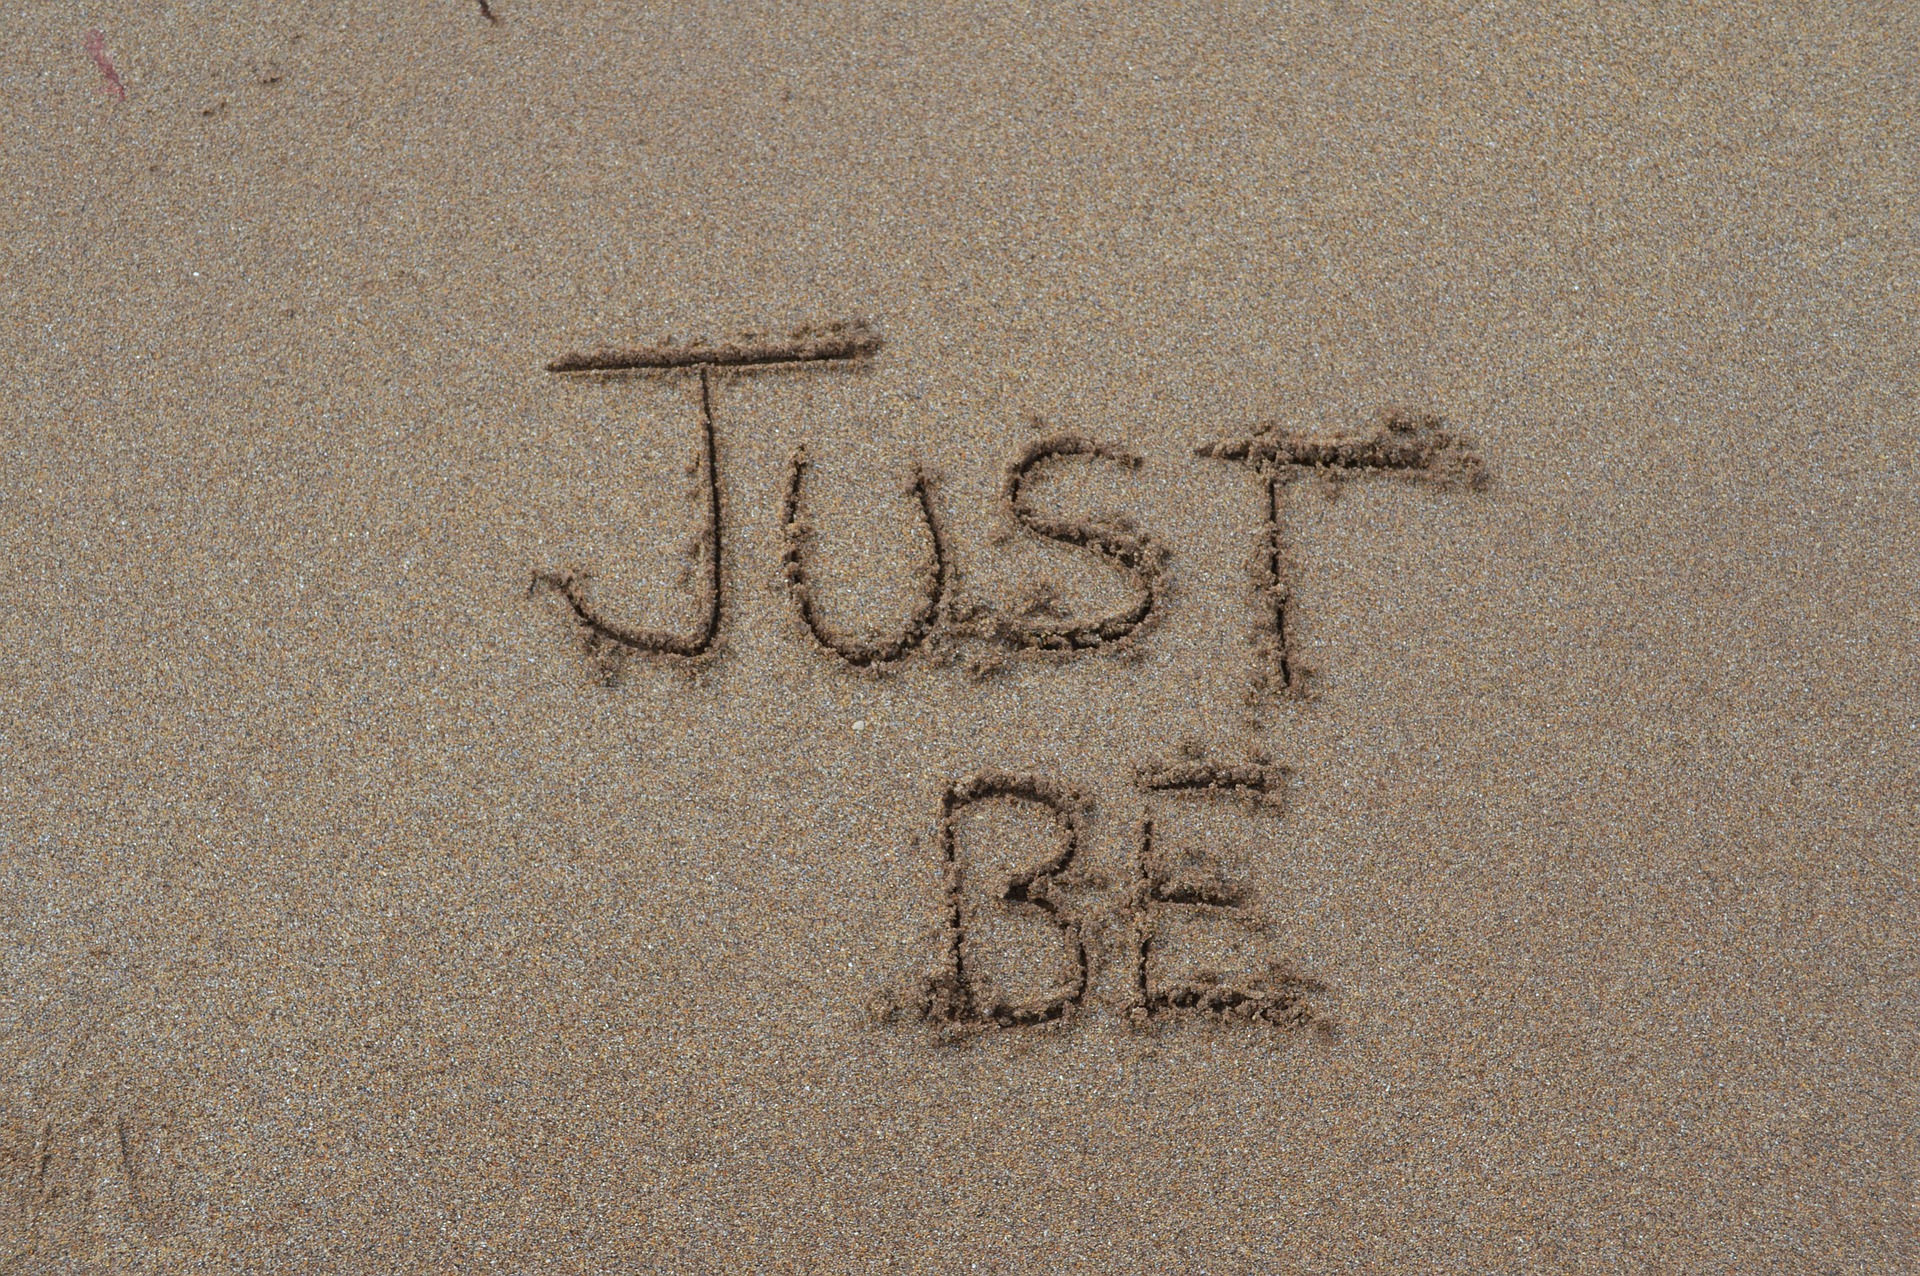 Written in the sand "Just be"